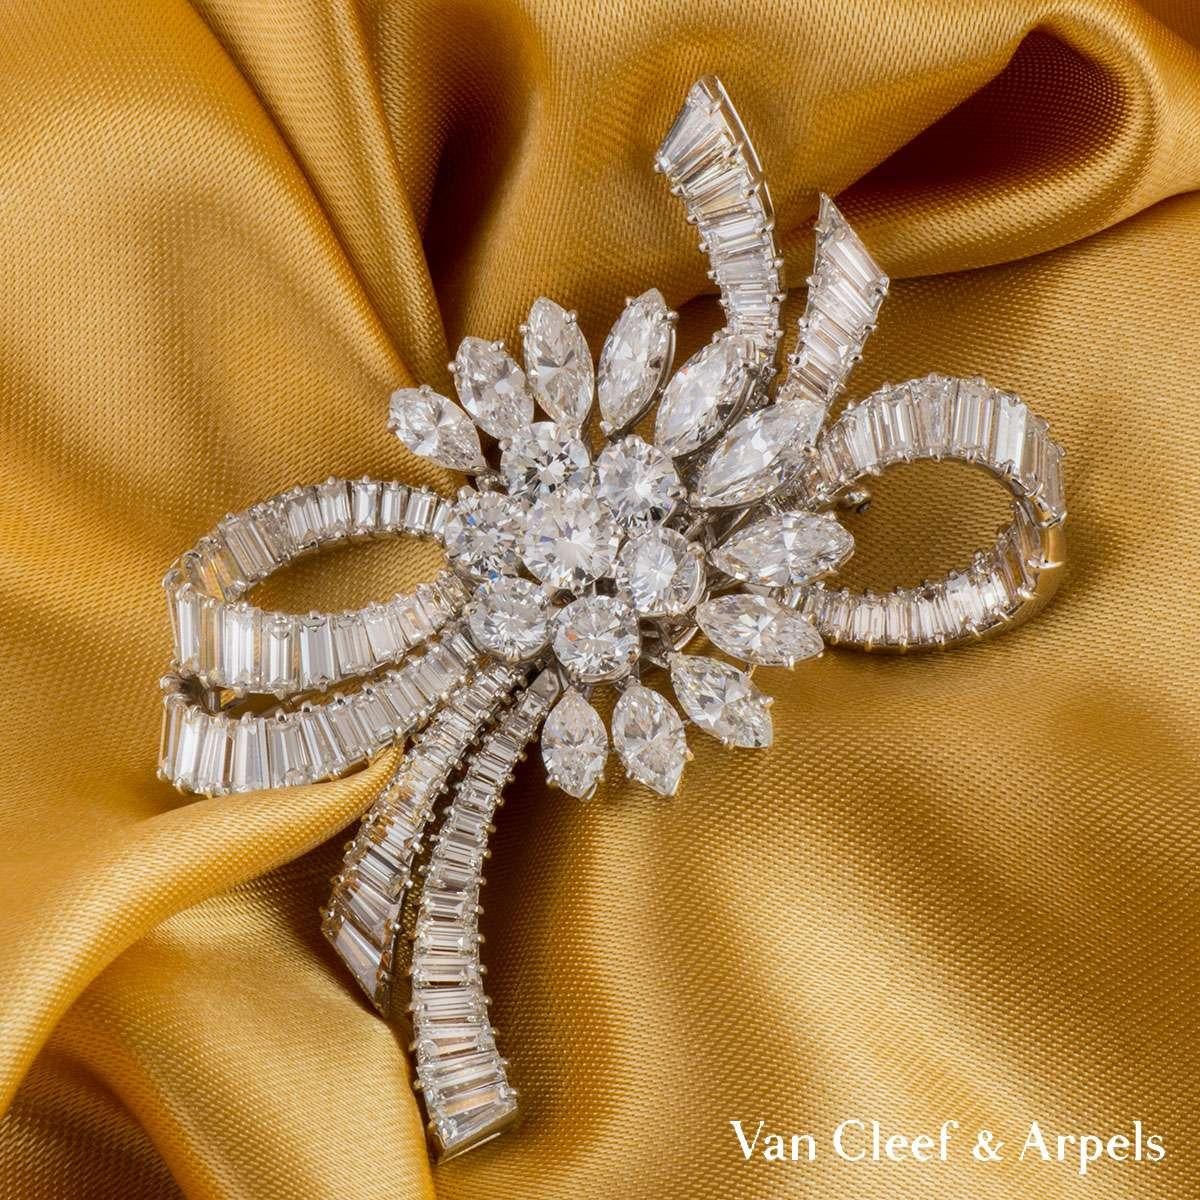 An exceptional Van Cleef & Arpels diamond brooch c.1950. The central cluster of seven round brilliant cut diamonds are encircled by a half outer curve of marquise diamonds. The central round brilliant cut diamond weighs 0.65ct whilst the surrounding